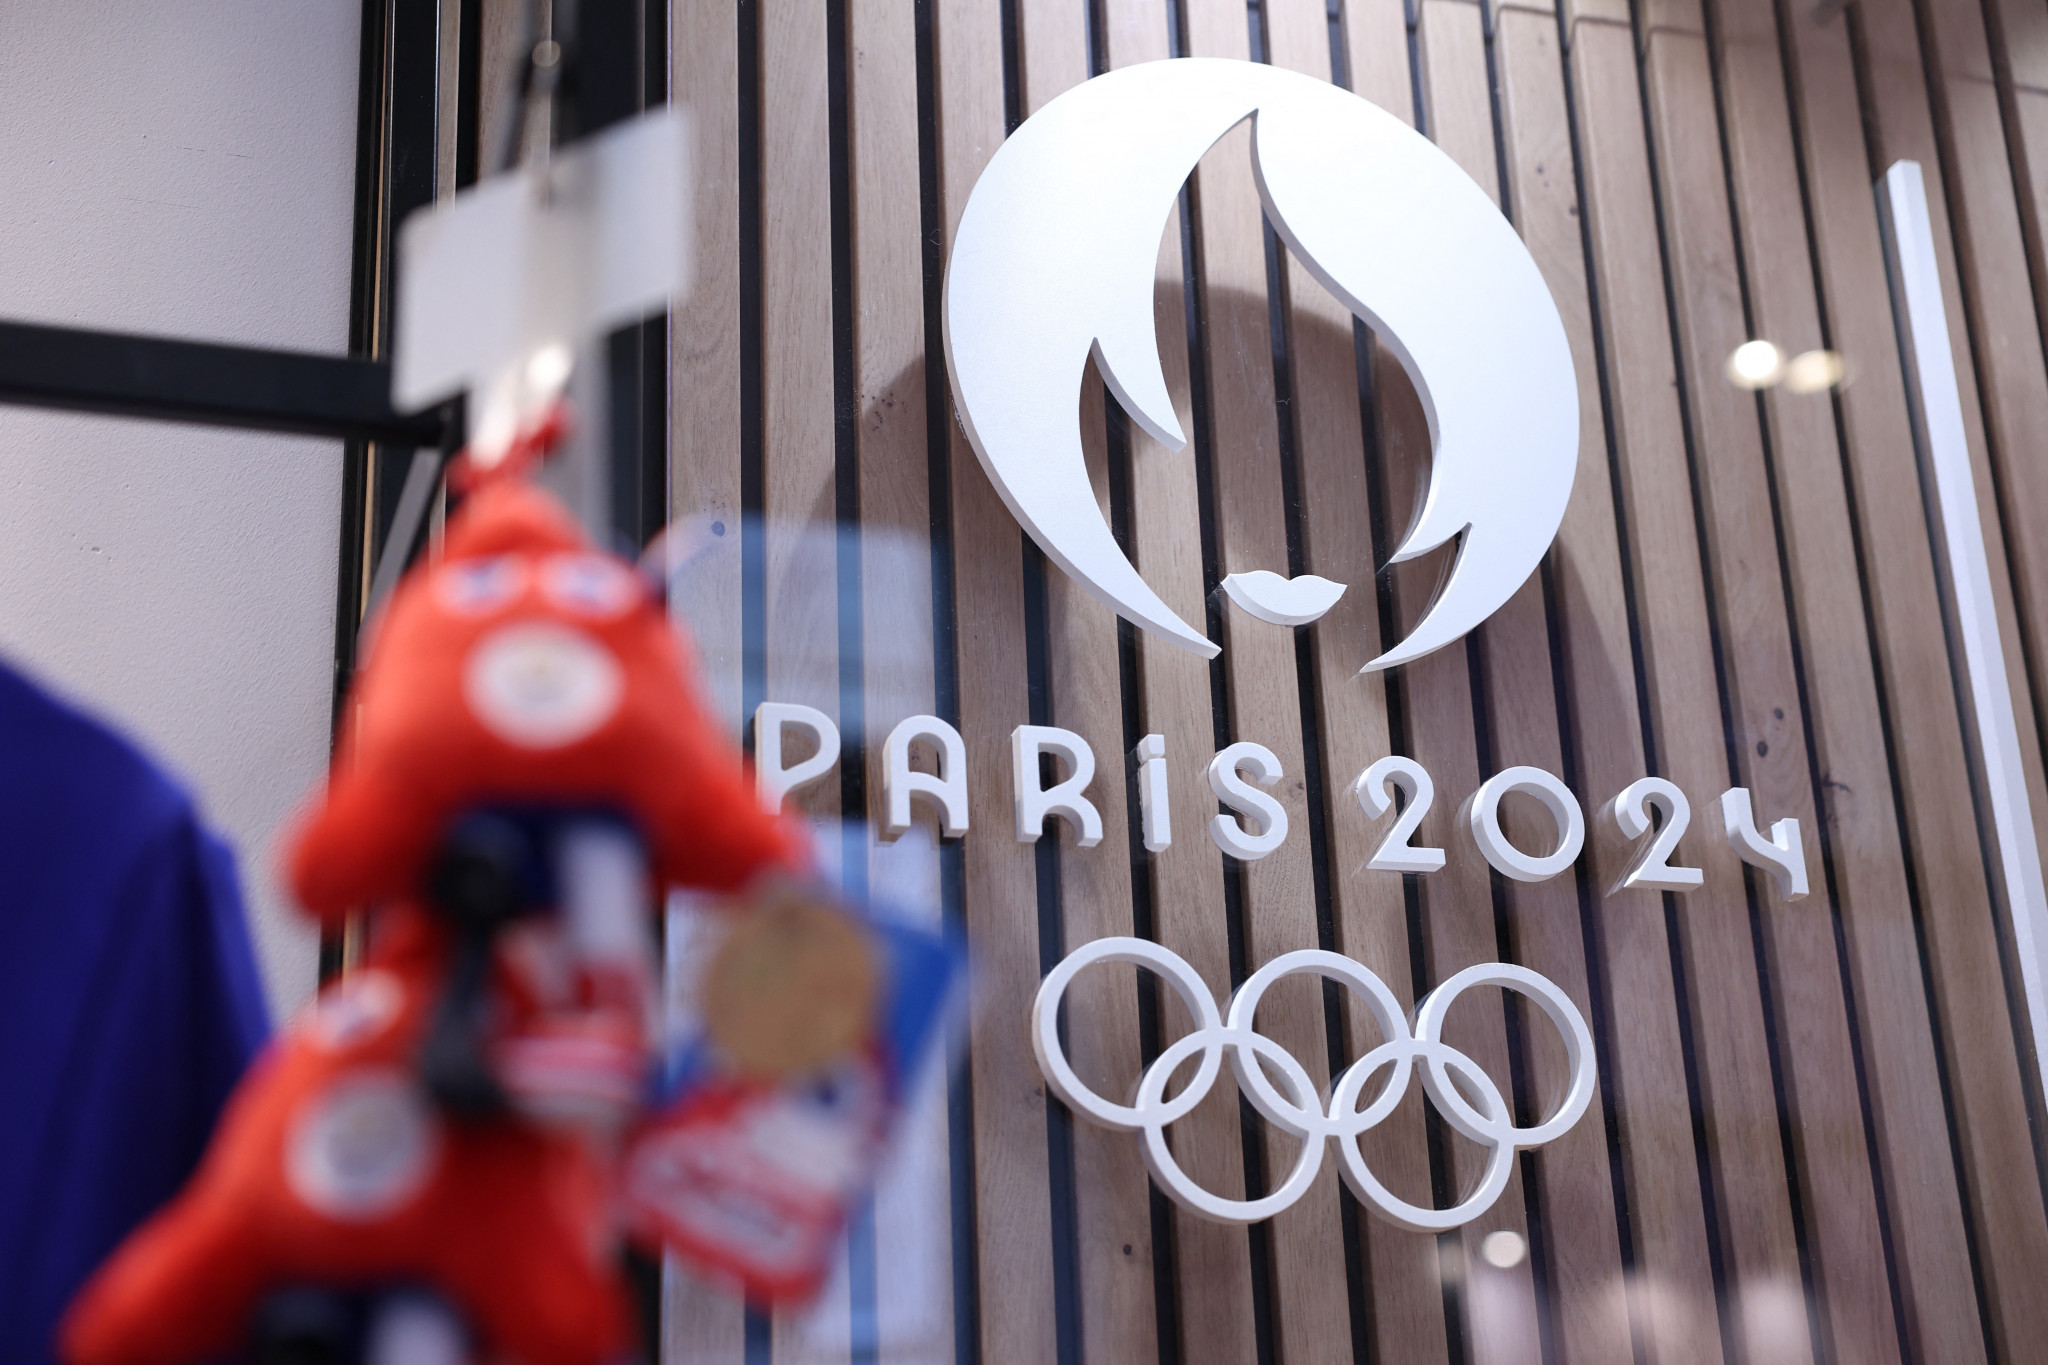 "Uncertainties and risk remain" in Paris 2024 budget, Court of Auditors find